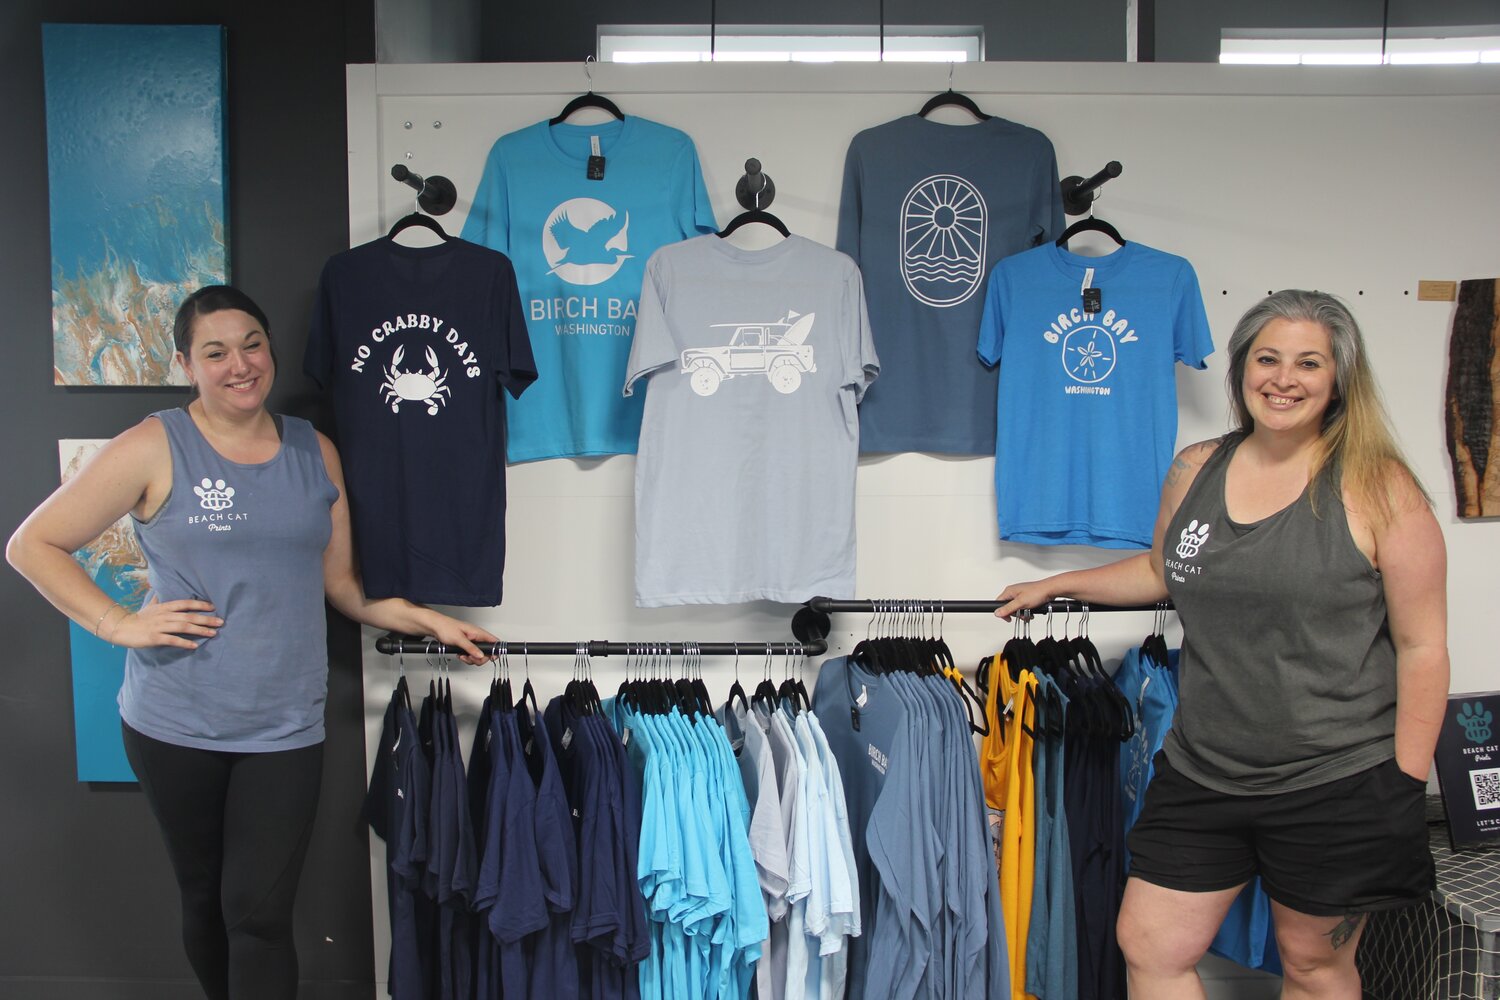 Beach Cat Prints employees Eliza McElroy, l., and Dez Sanguinetti in front of Birch Bay merchandise for sale at the new print shop, located in unit 104 at 4823 Alderson Road.